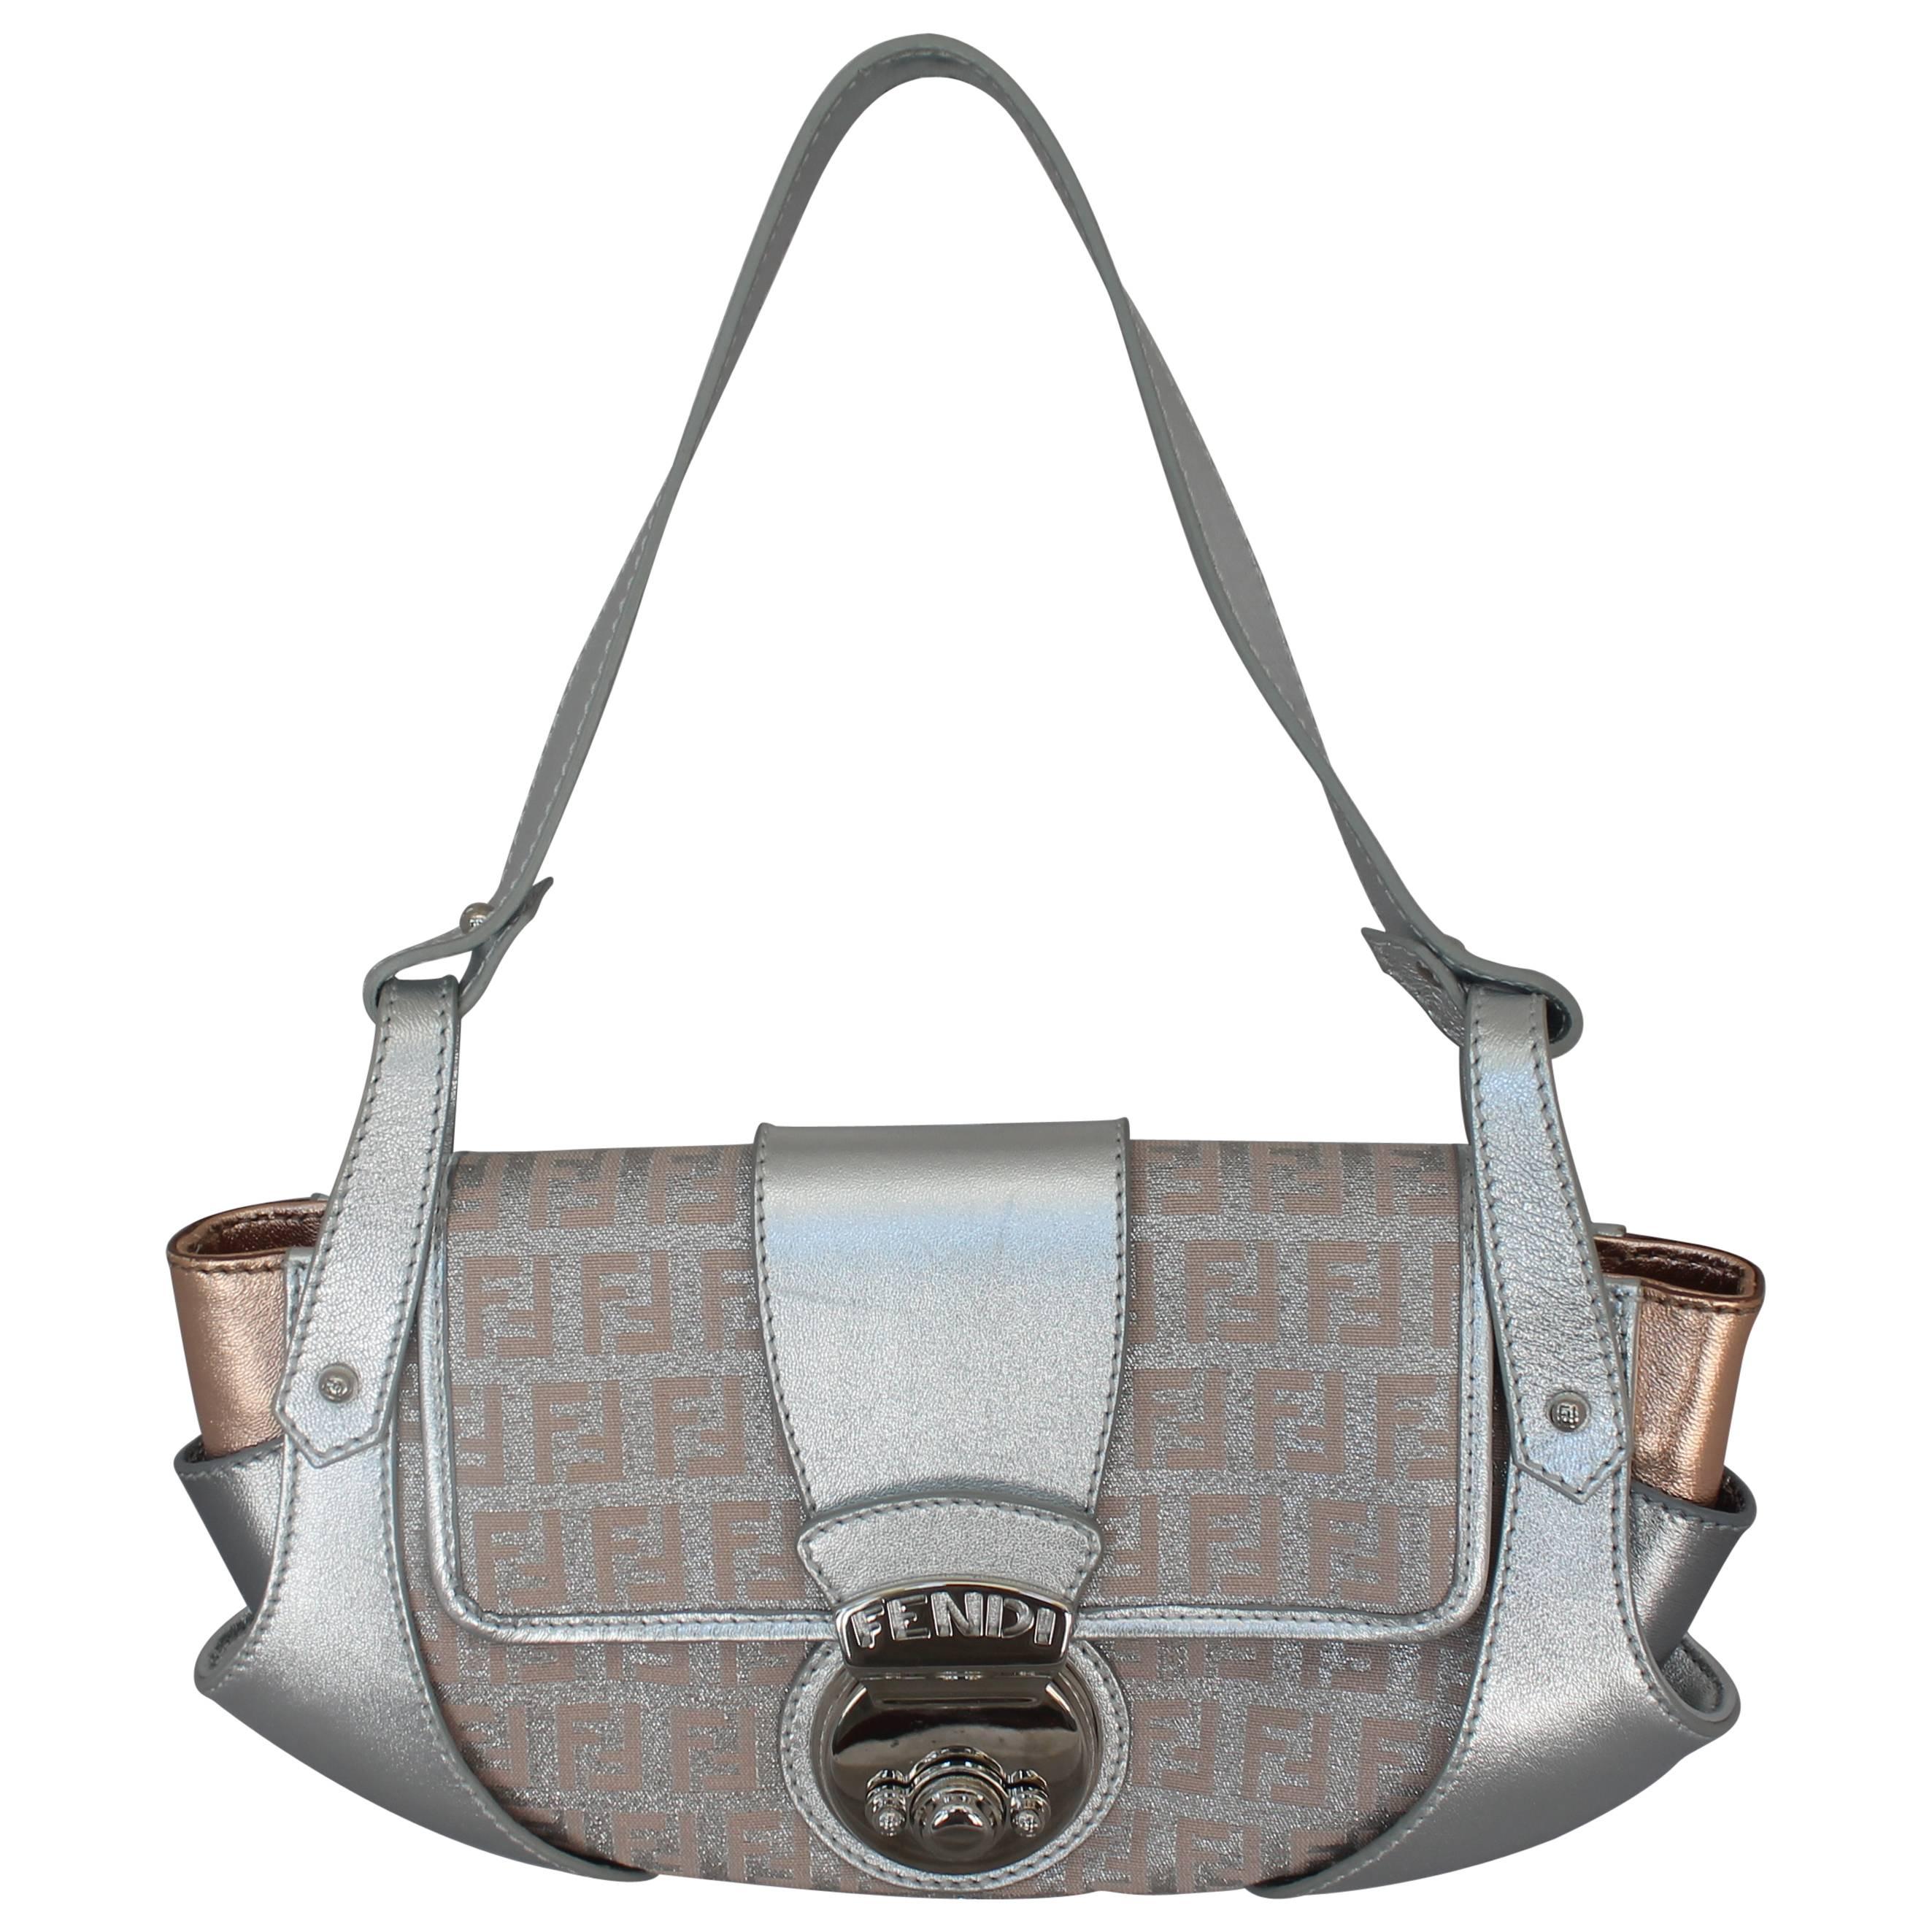 Fendi Silver and Rose Gold Leather with Monogram Handbag - SHW at ...